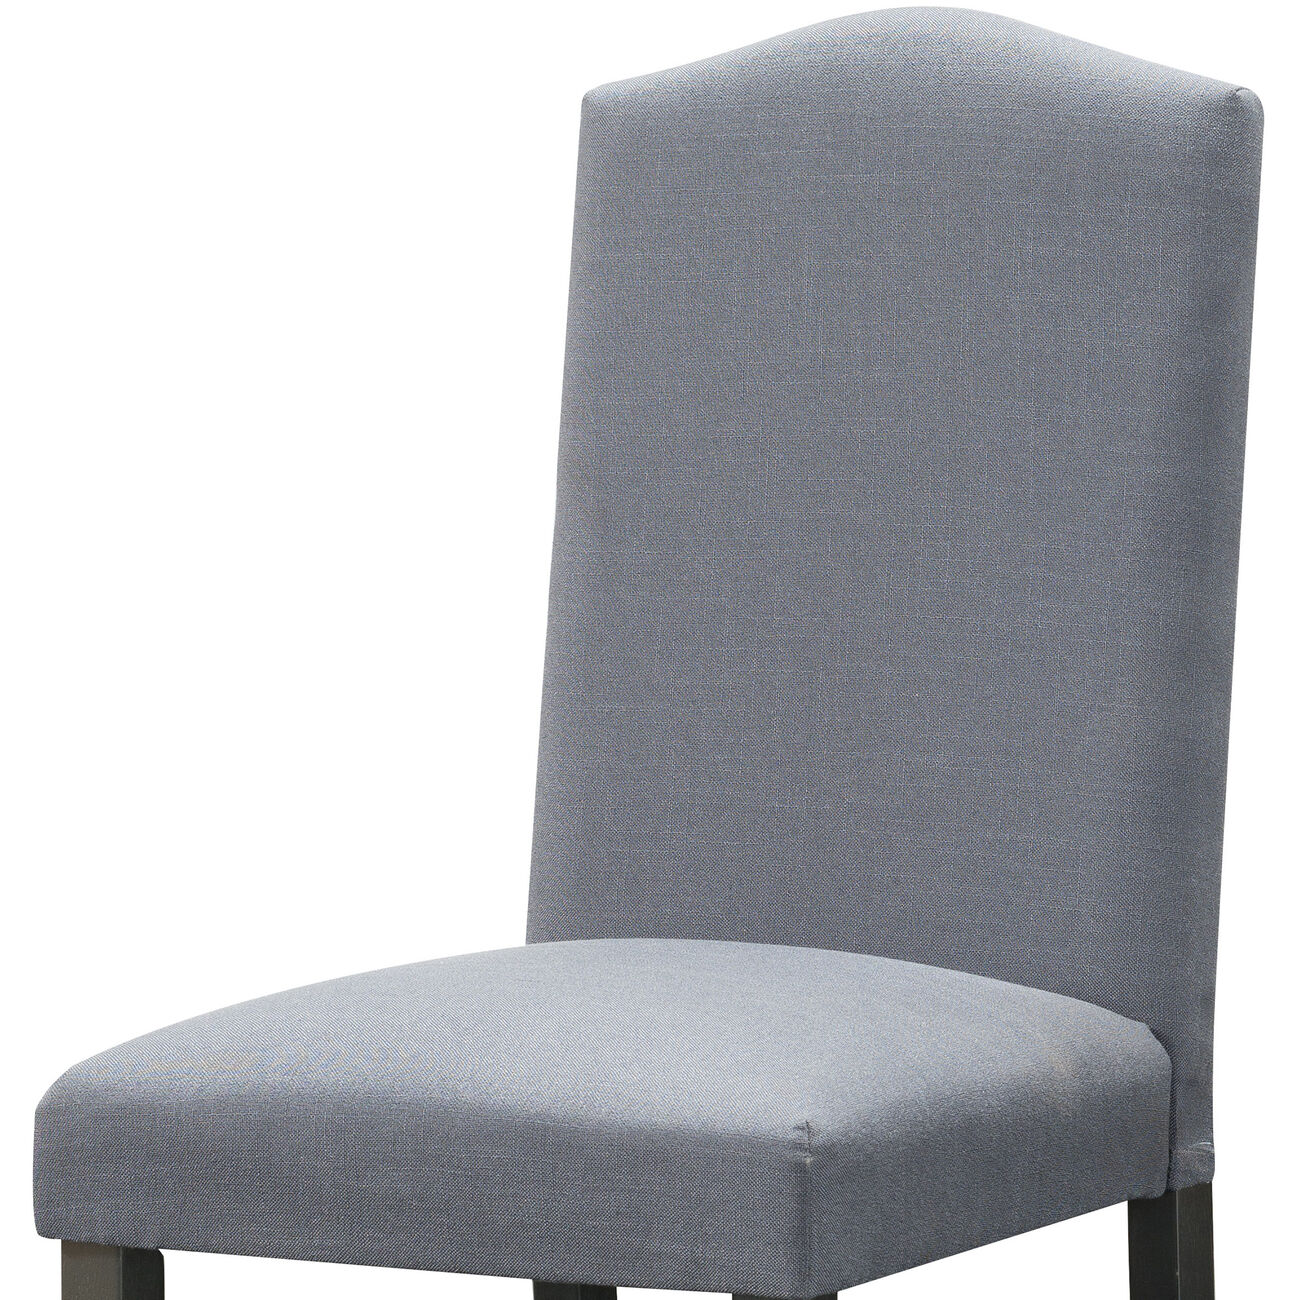 Fabric Upholstered Wooden Dining Chair with Scalloped Back, Set of 2, Gray